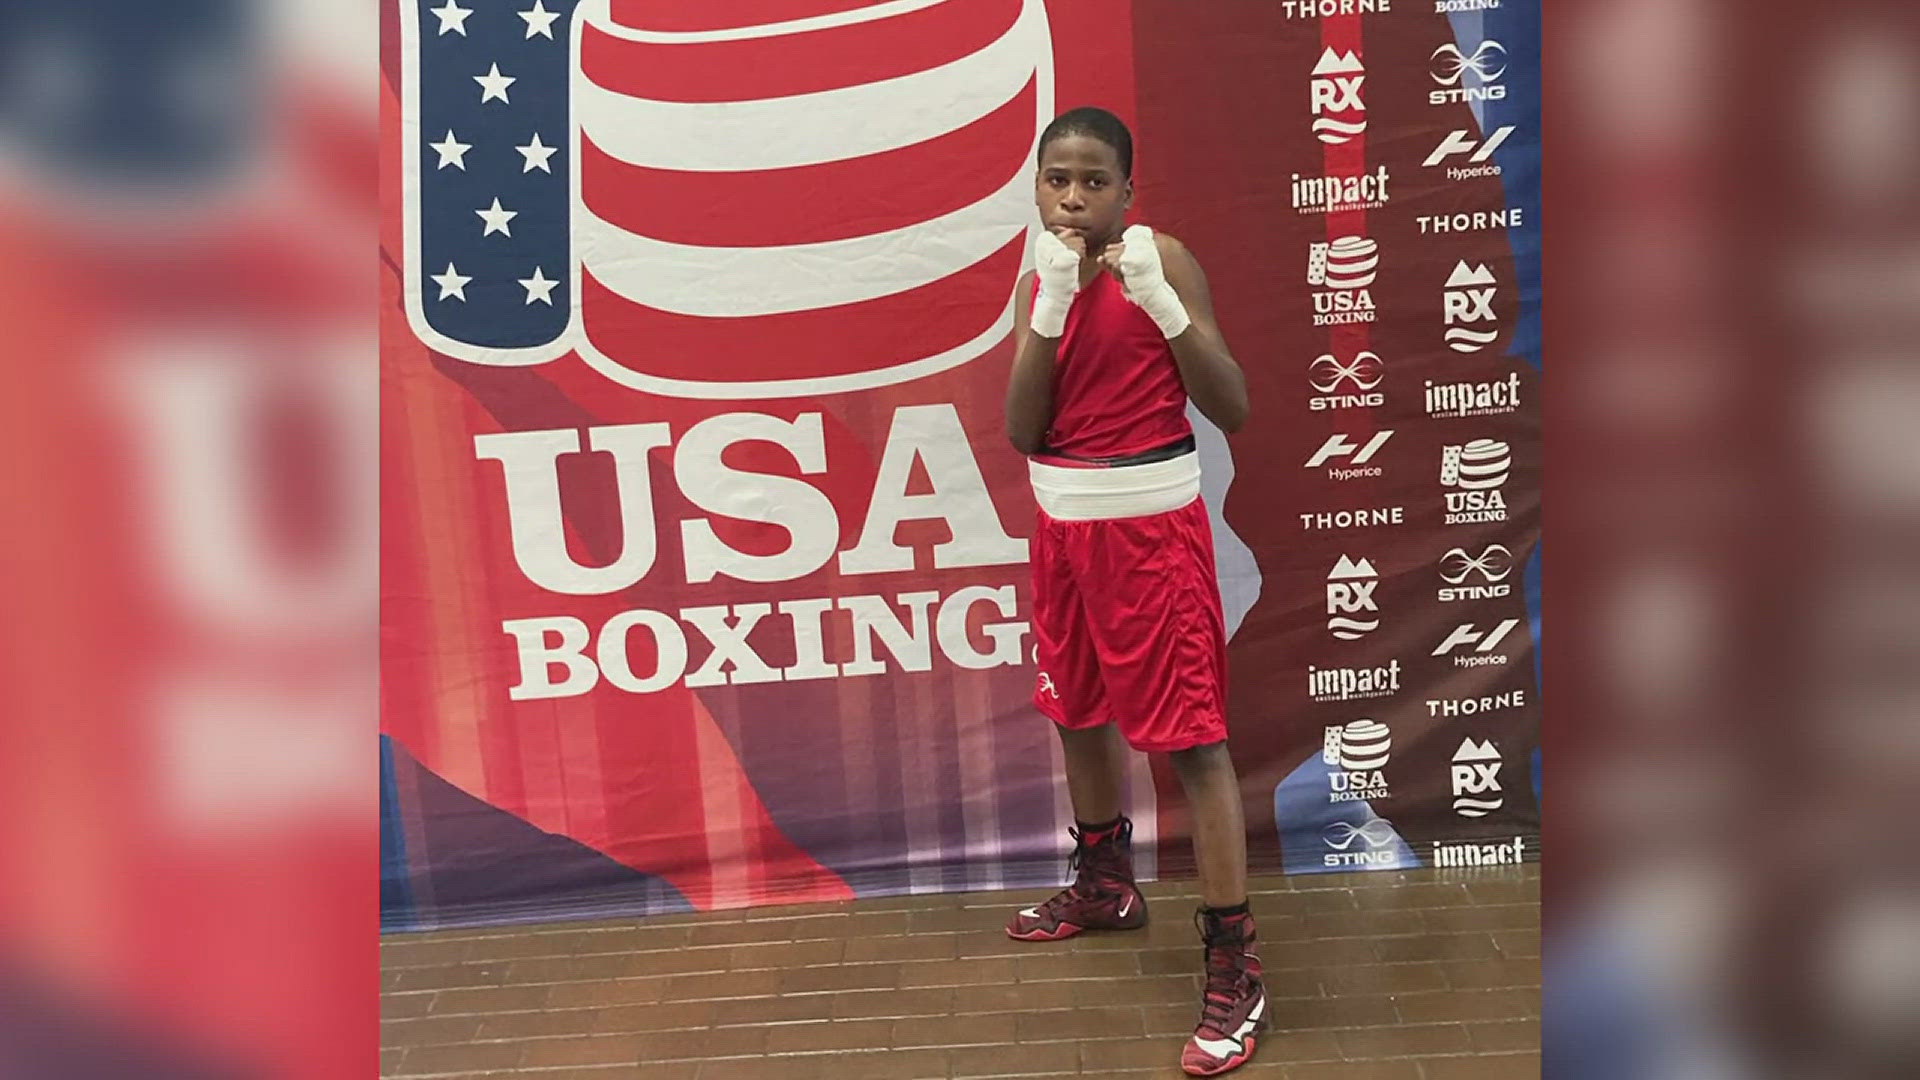 Quinton Thomas Jr., 12, has competed in 18 matches. At age 10, he competed in his first match at Houston Junior Golden Gloves, taking home first place.